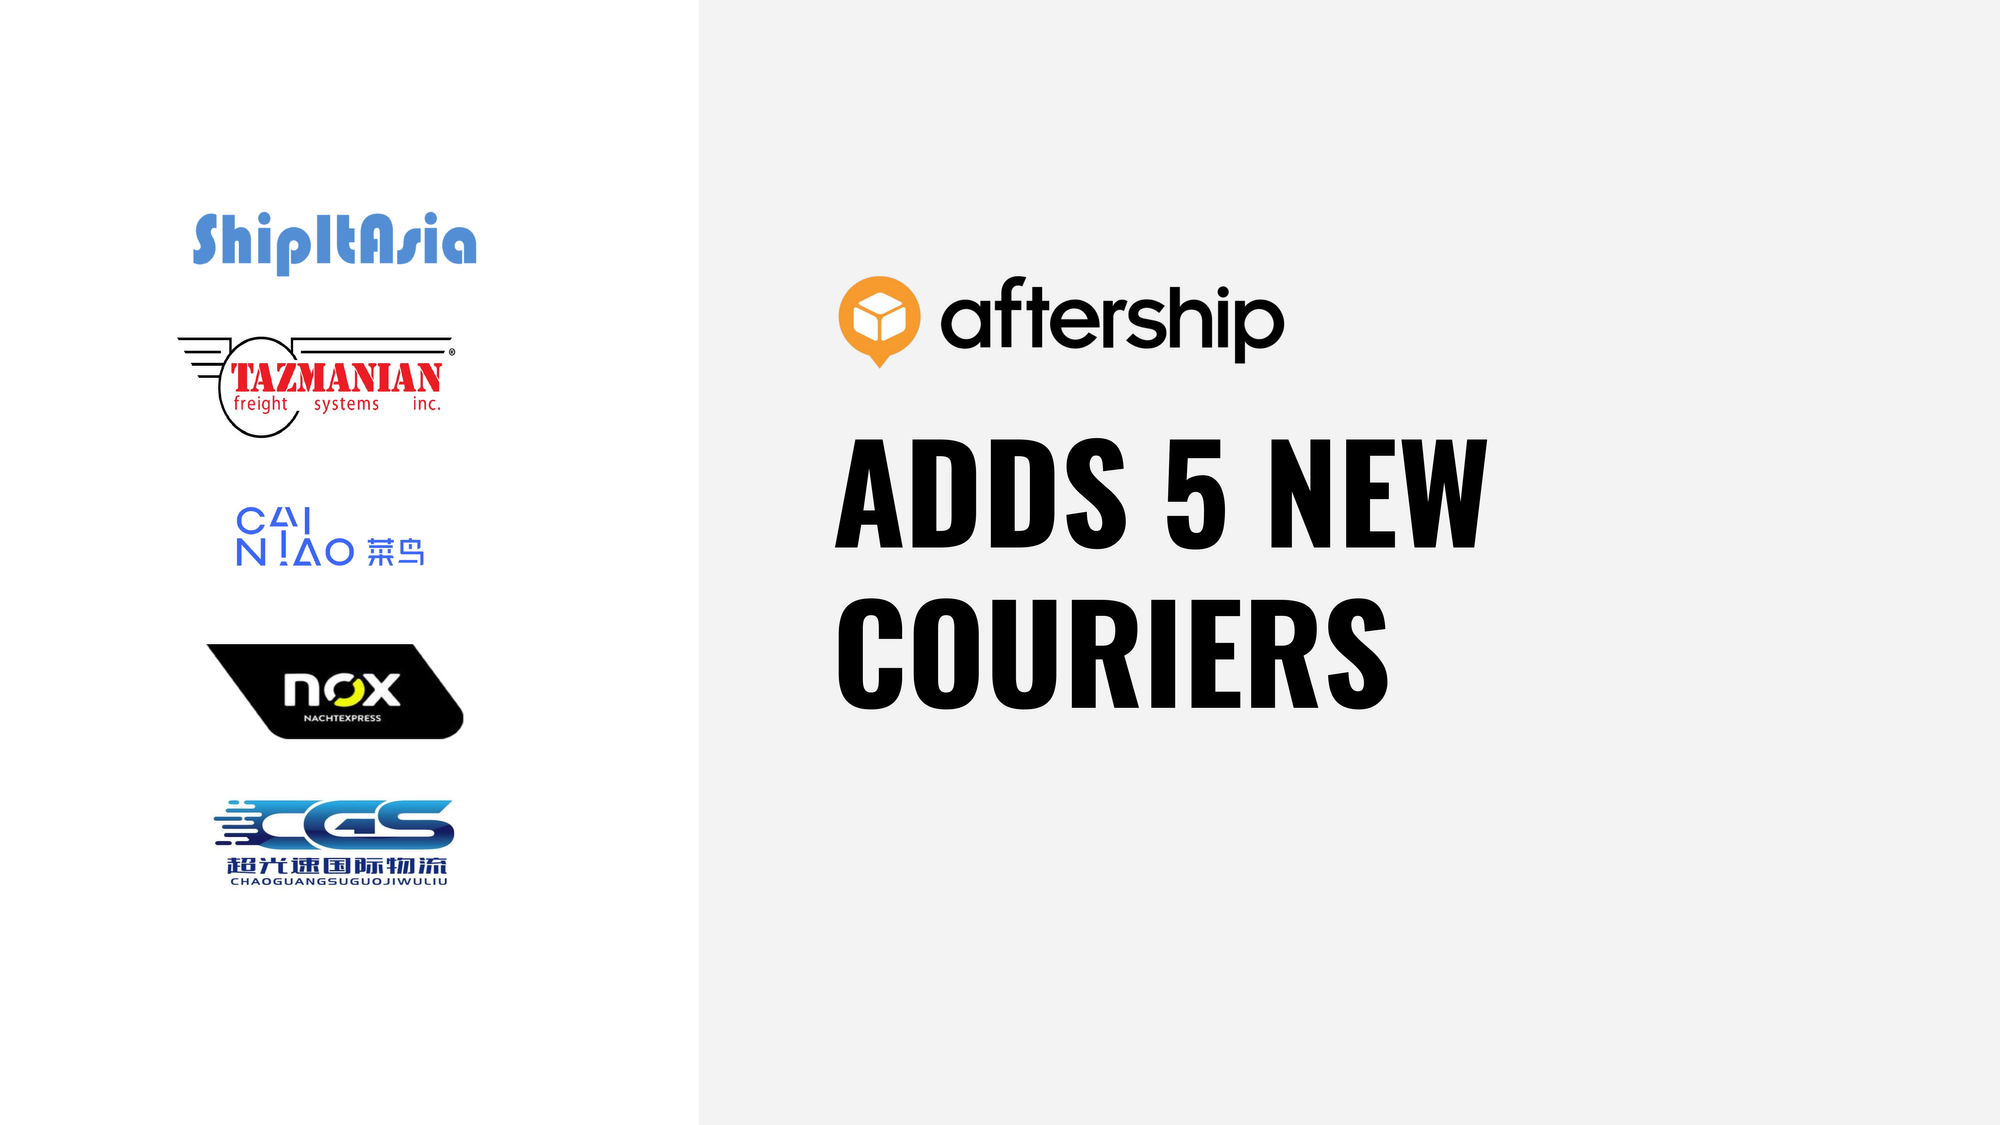 AfterShip adds 5 new couriers this week (21 Sep 2020 to 25 Sep 2020)